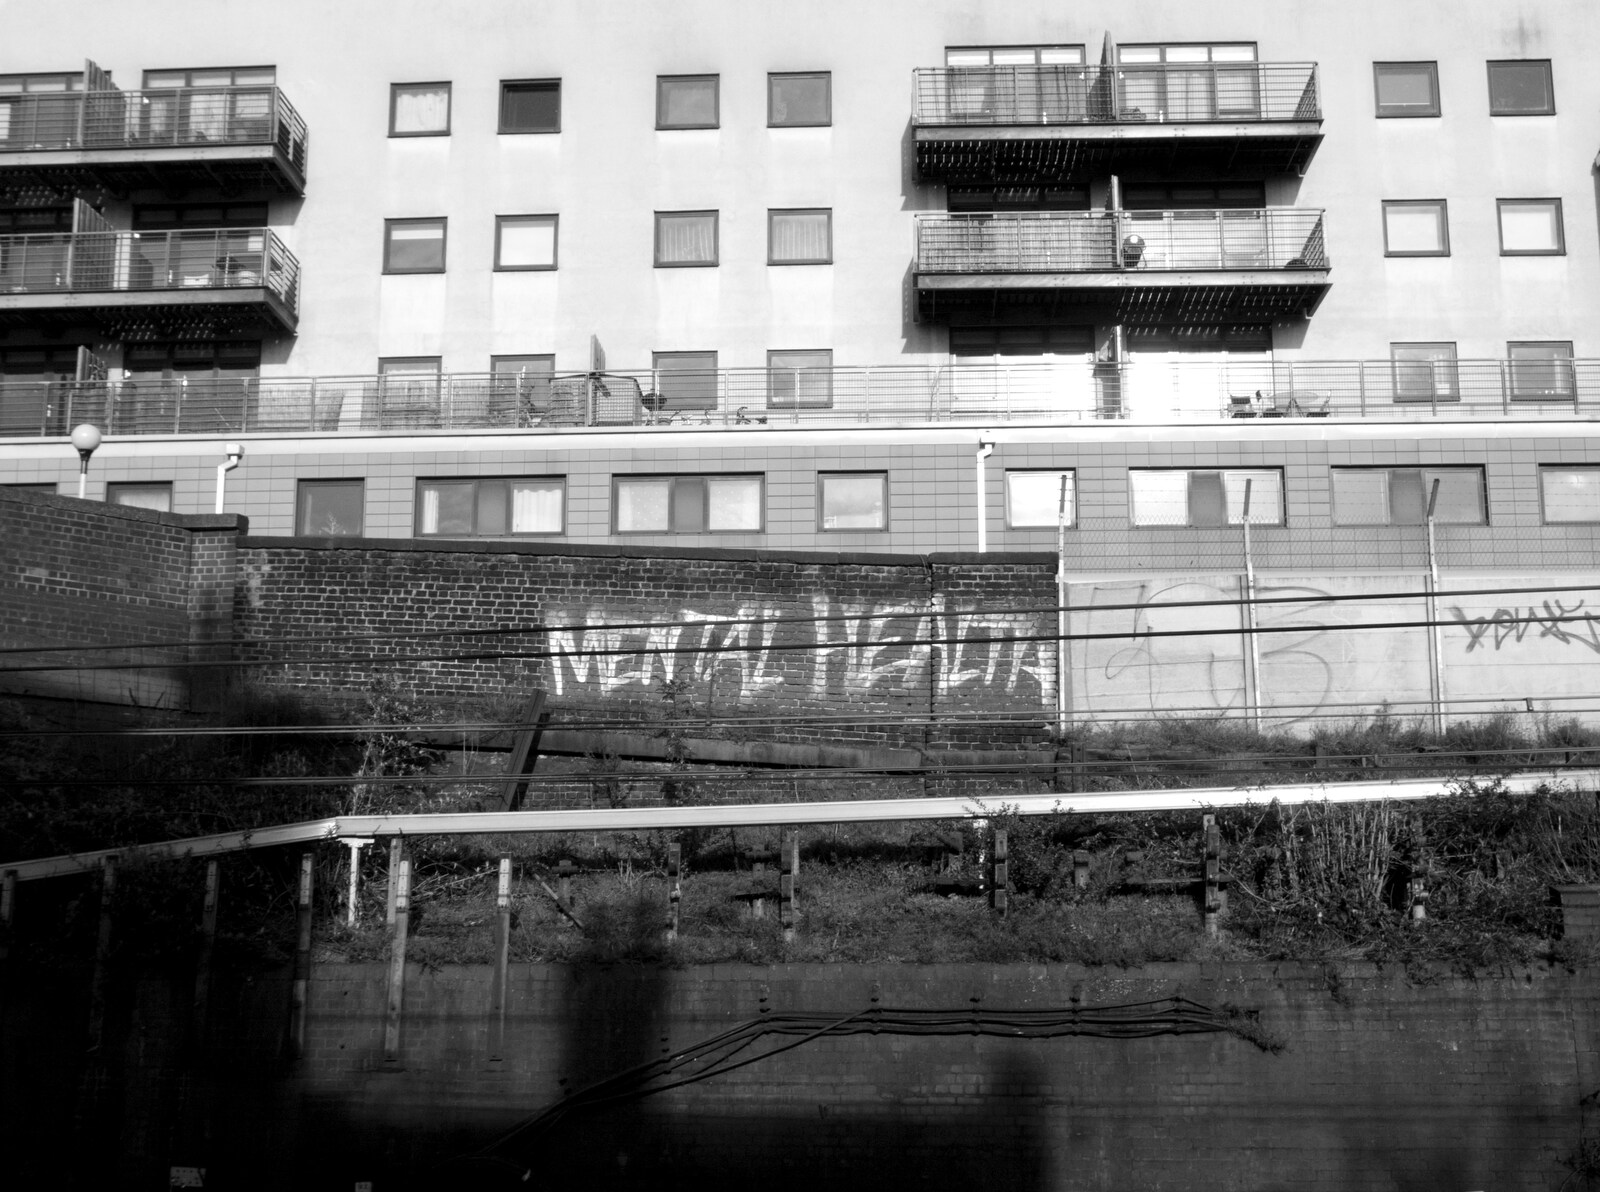 Broken-down Freight Trains, Manor Park, London - 28th January 2020: Mental Health tag on a wall